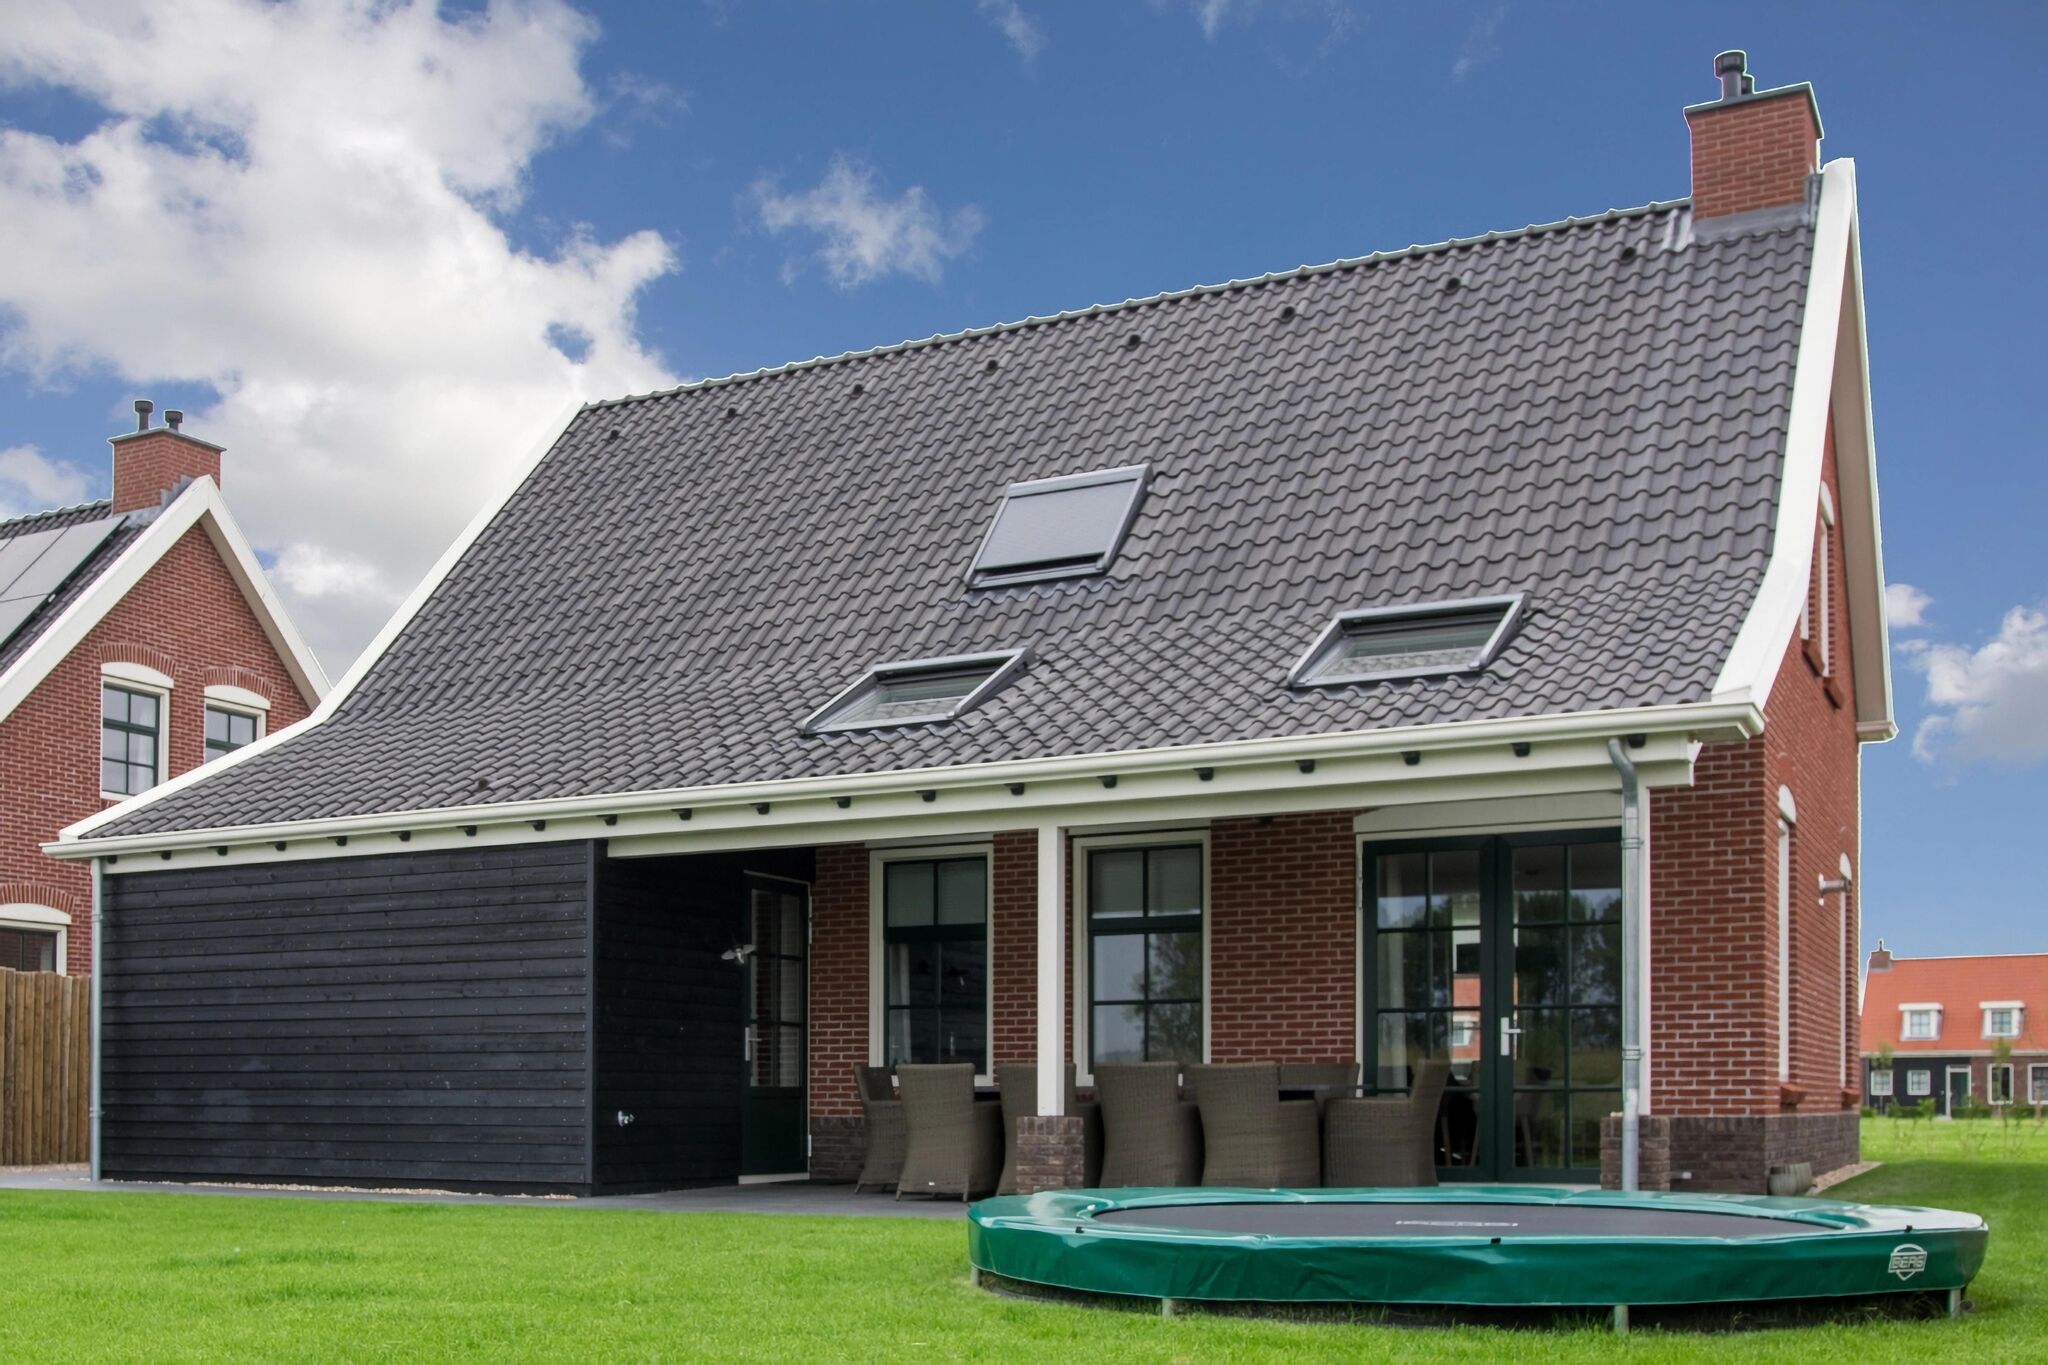 Holiday home with sauna and sun shower in Zeeland